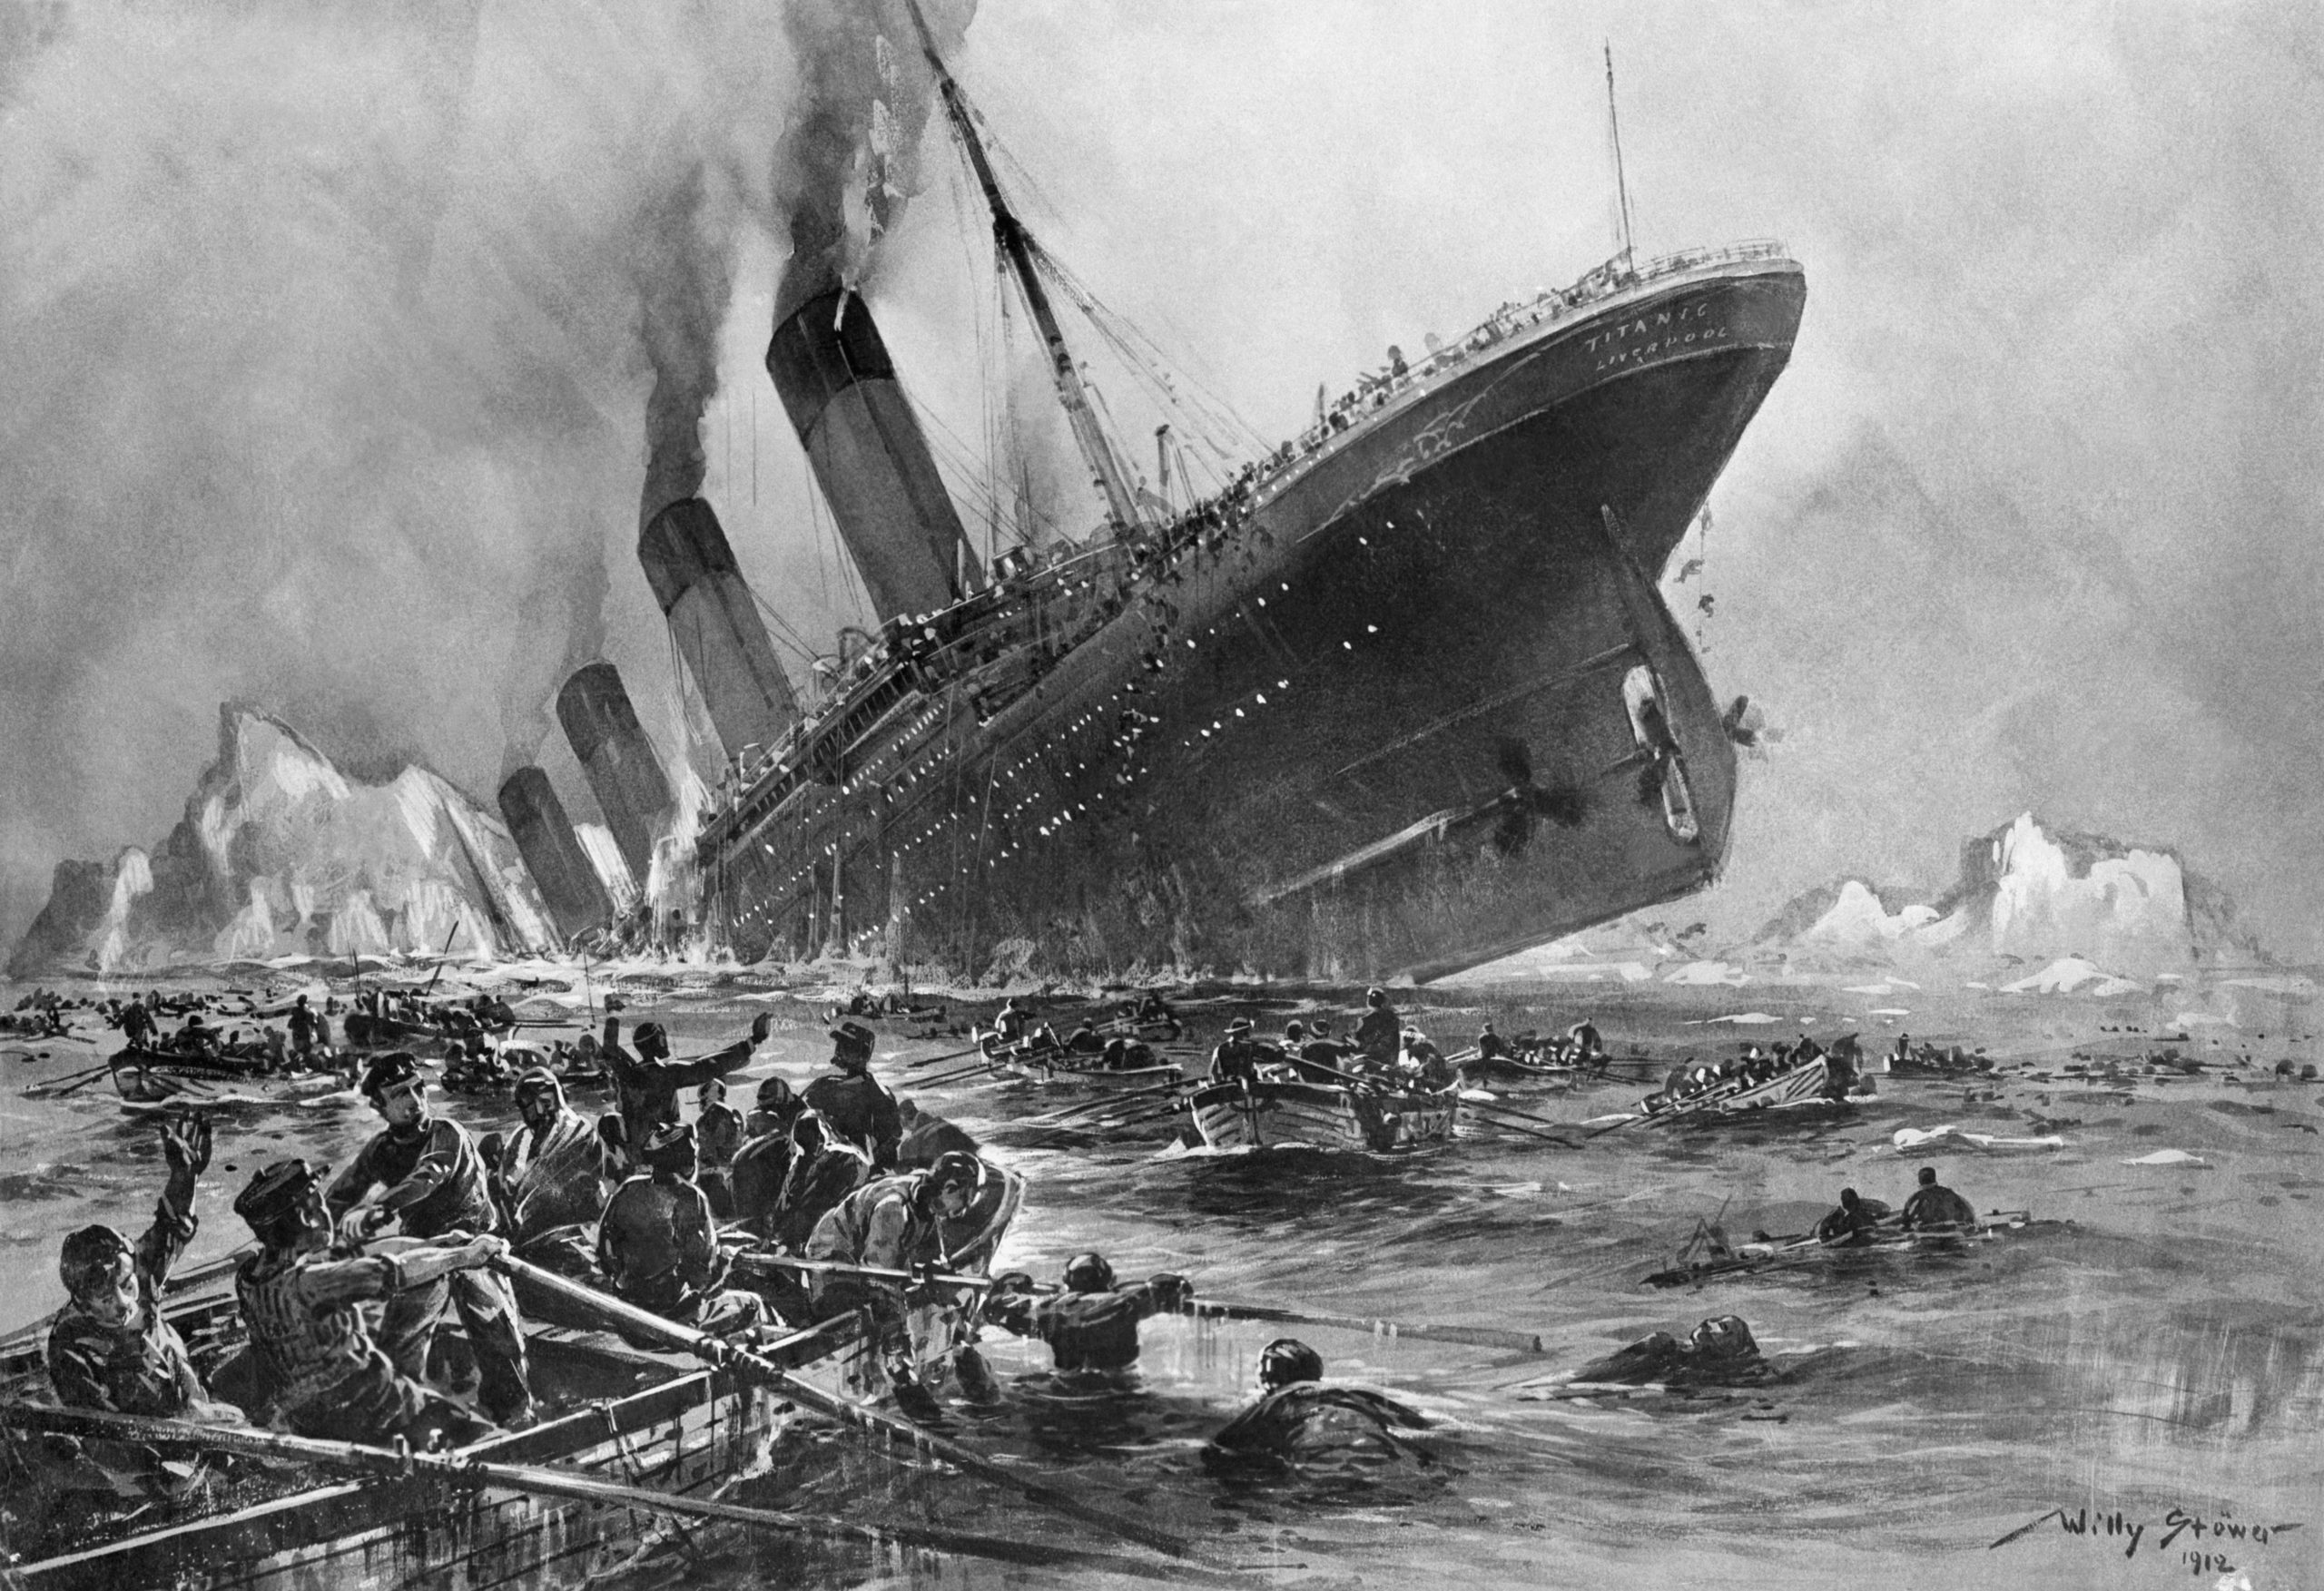 What Happened To The Bodies From The Titanic? | The Vintage News